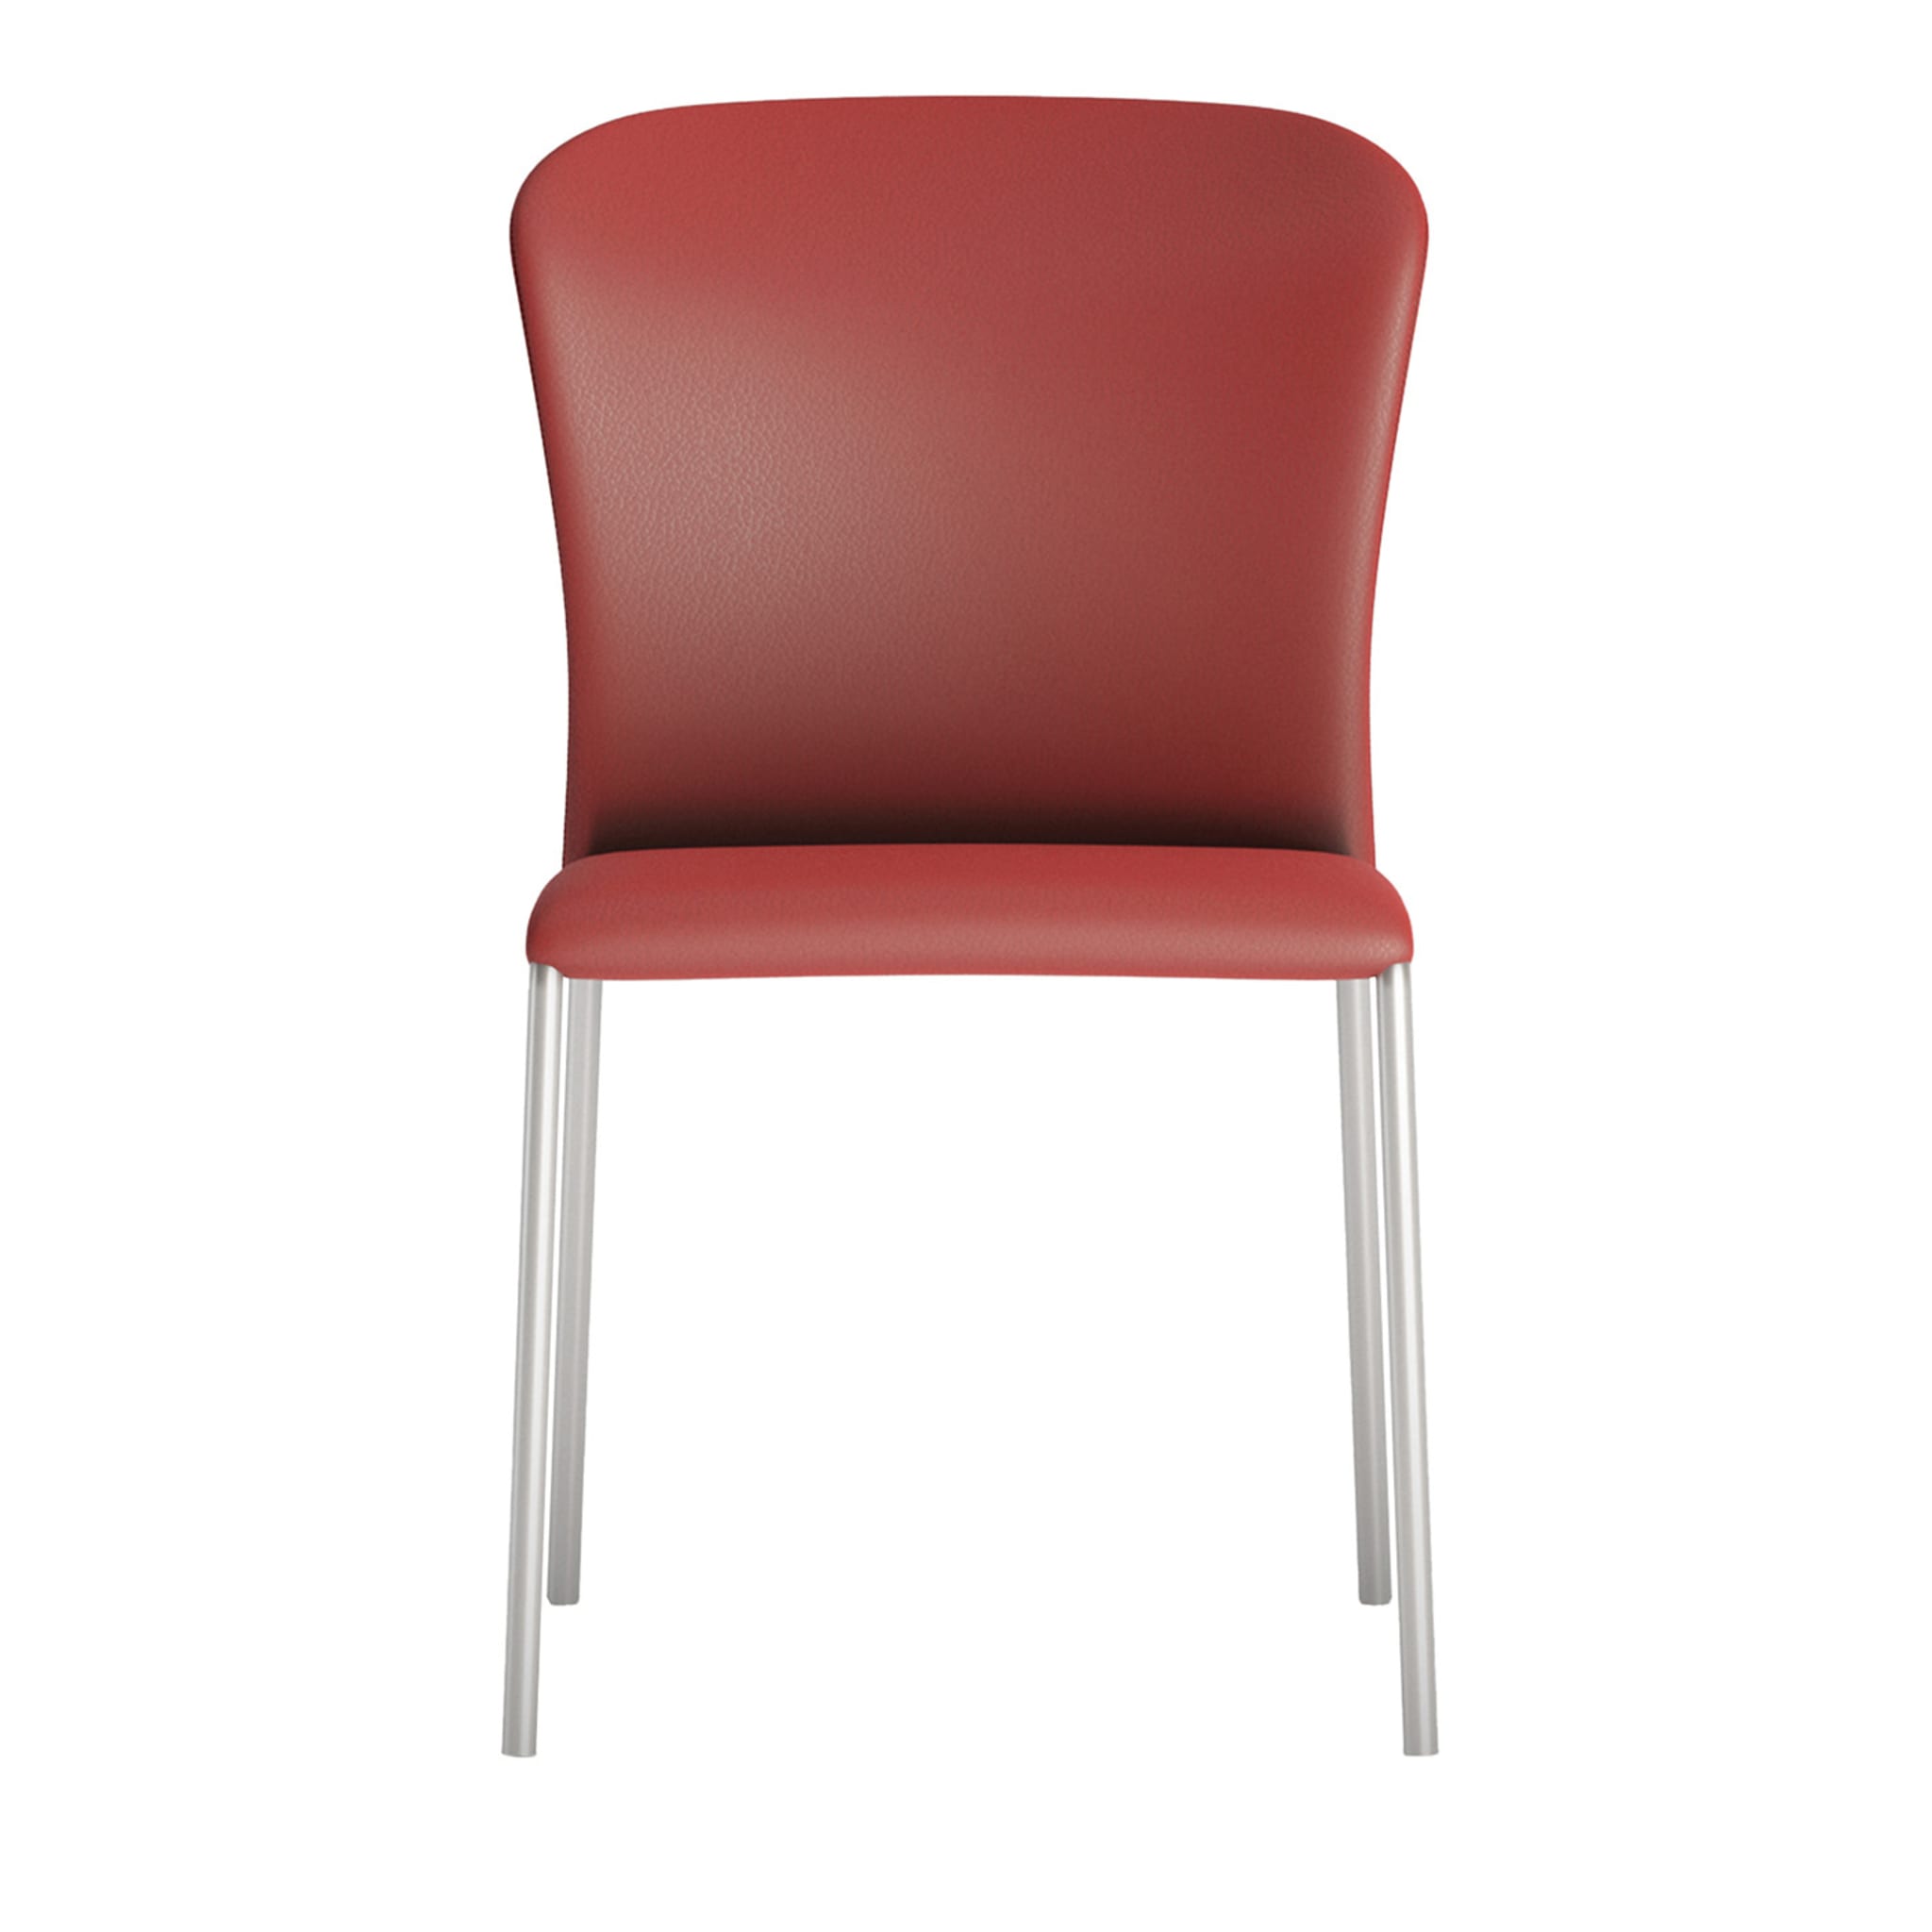 Seven Red Faux Leather Chair by Ciani Design - Main view